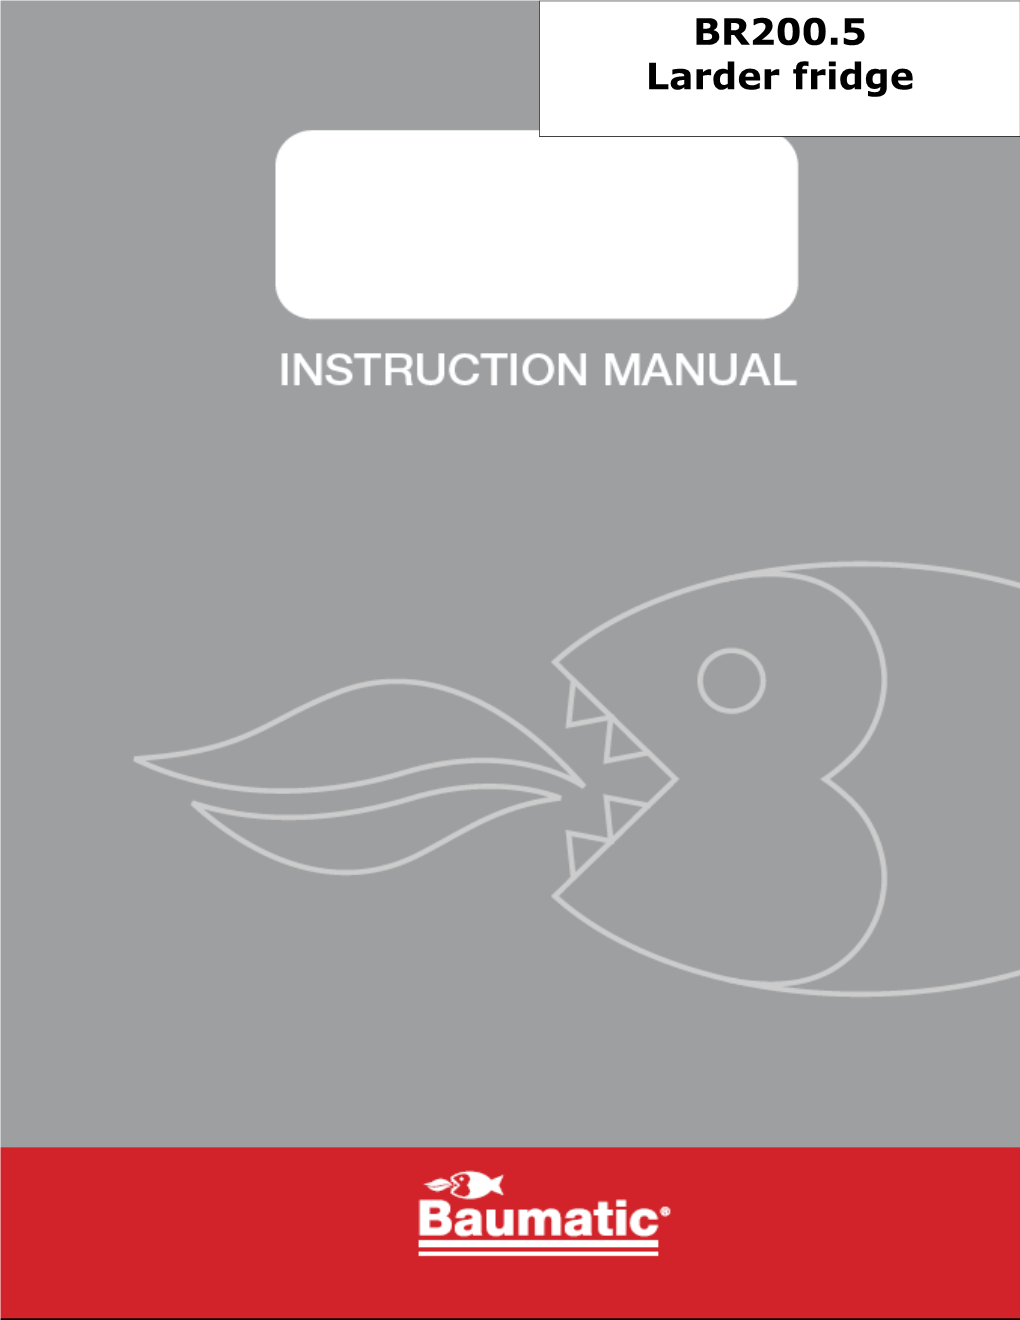 User Manual for Your Baumatic